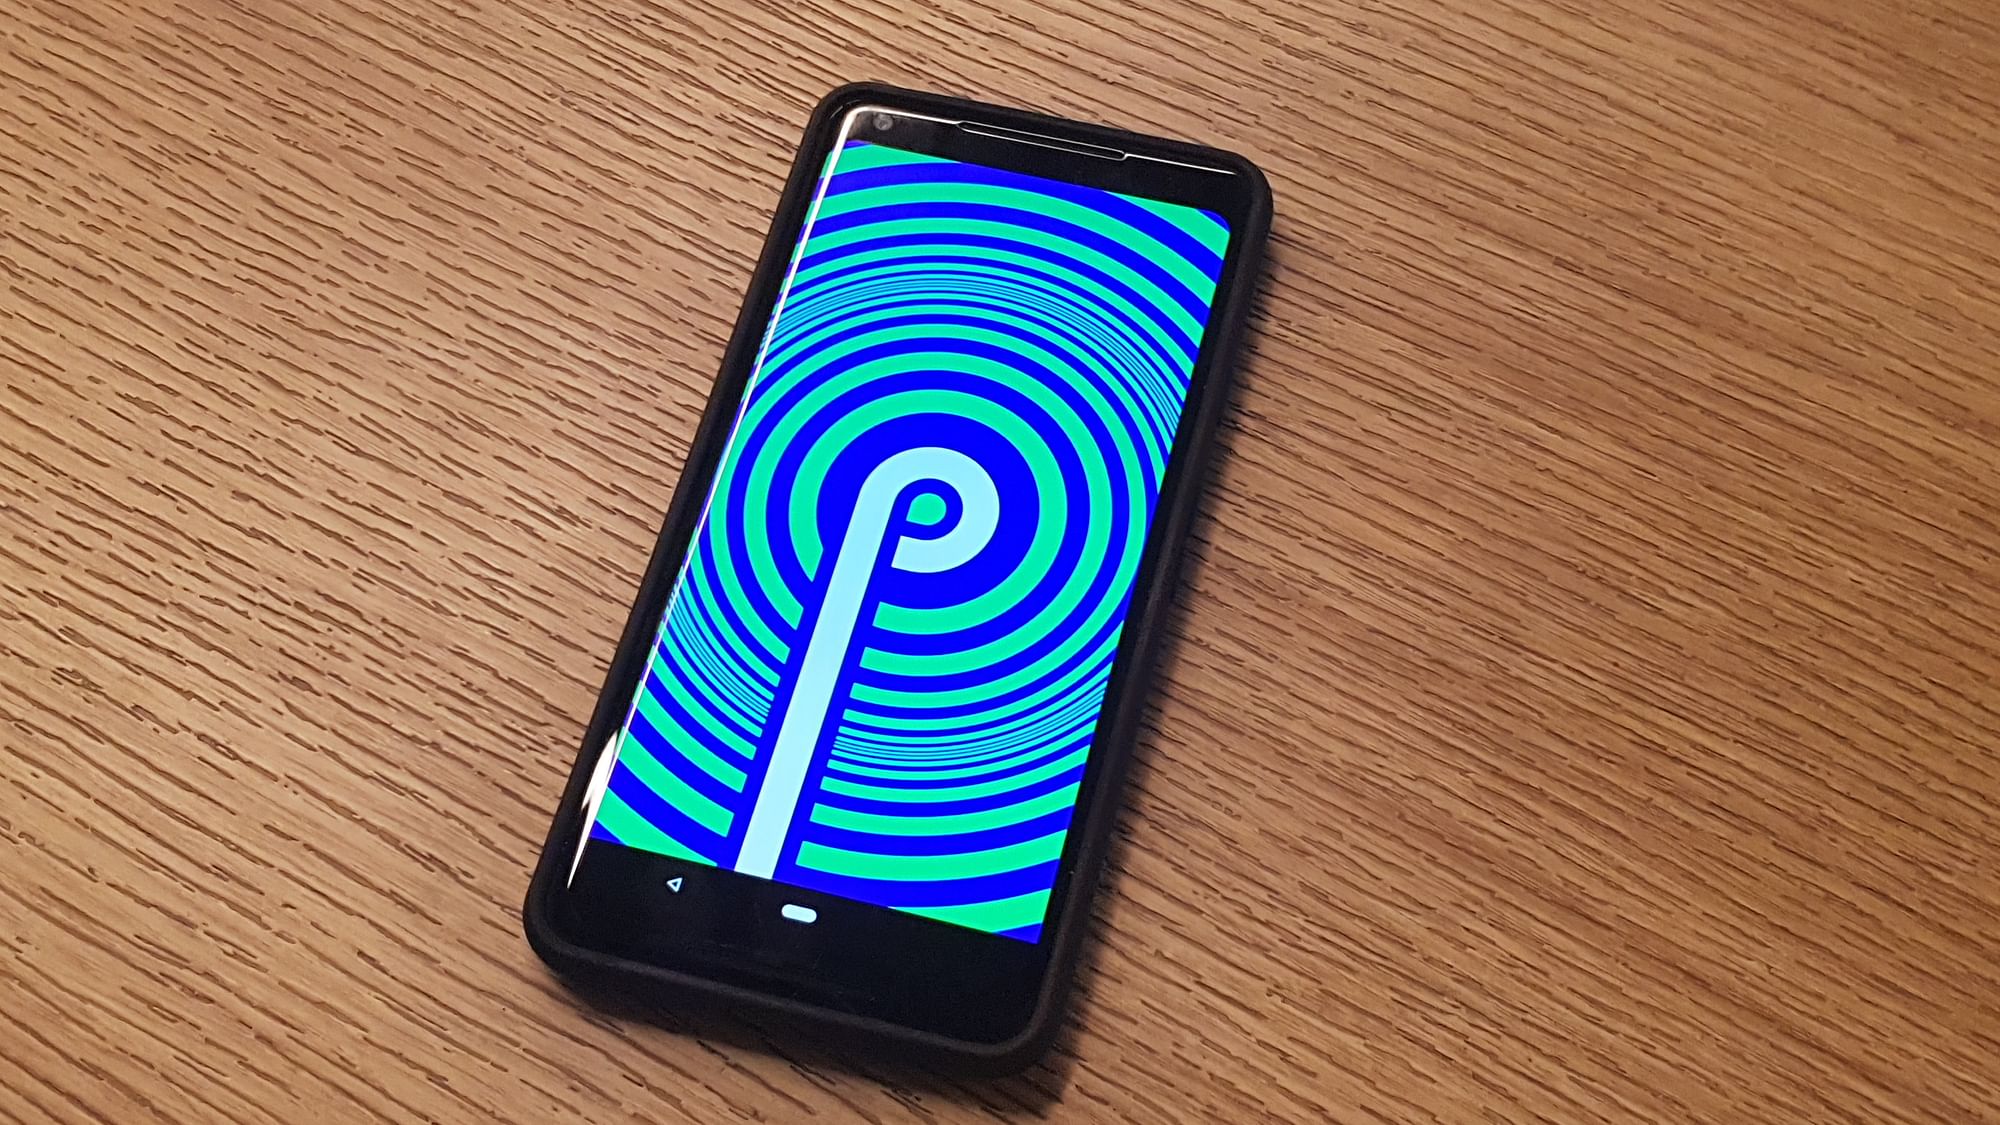 Android Pie is only running on 10 percent of devices after almost one year since its release.